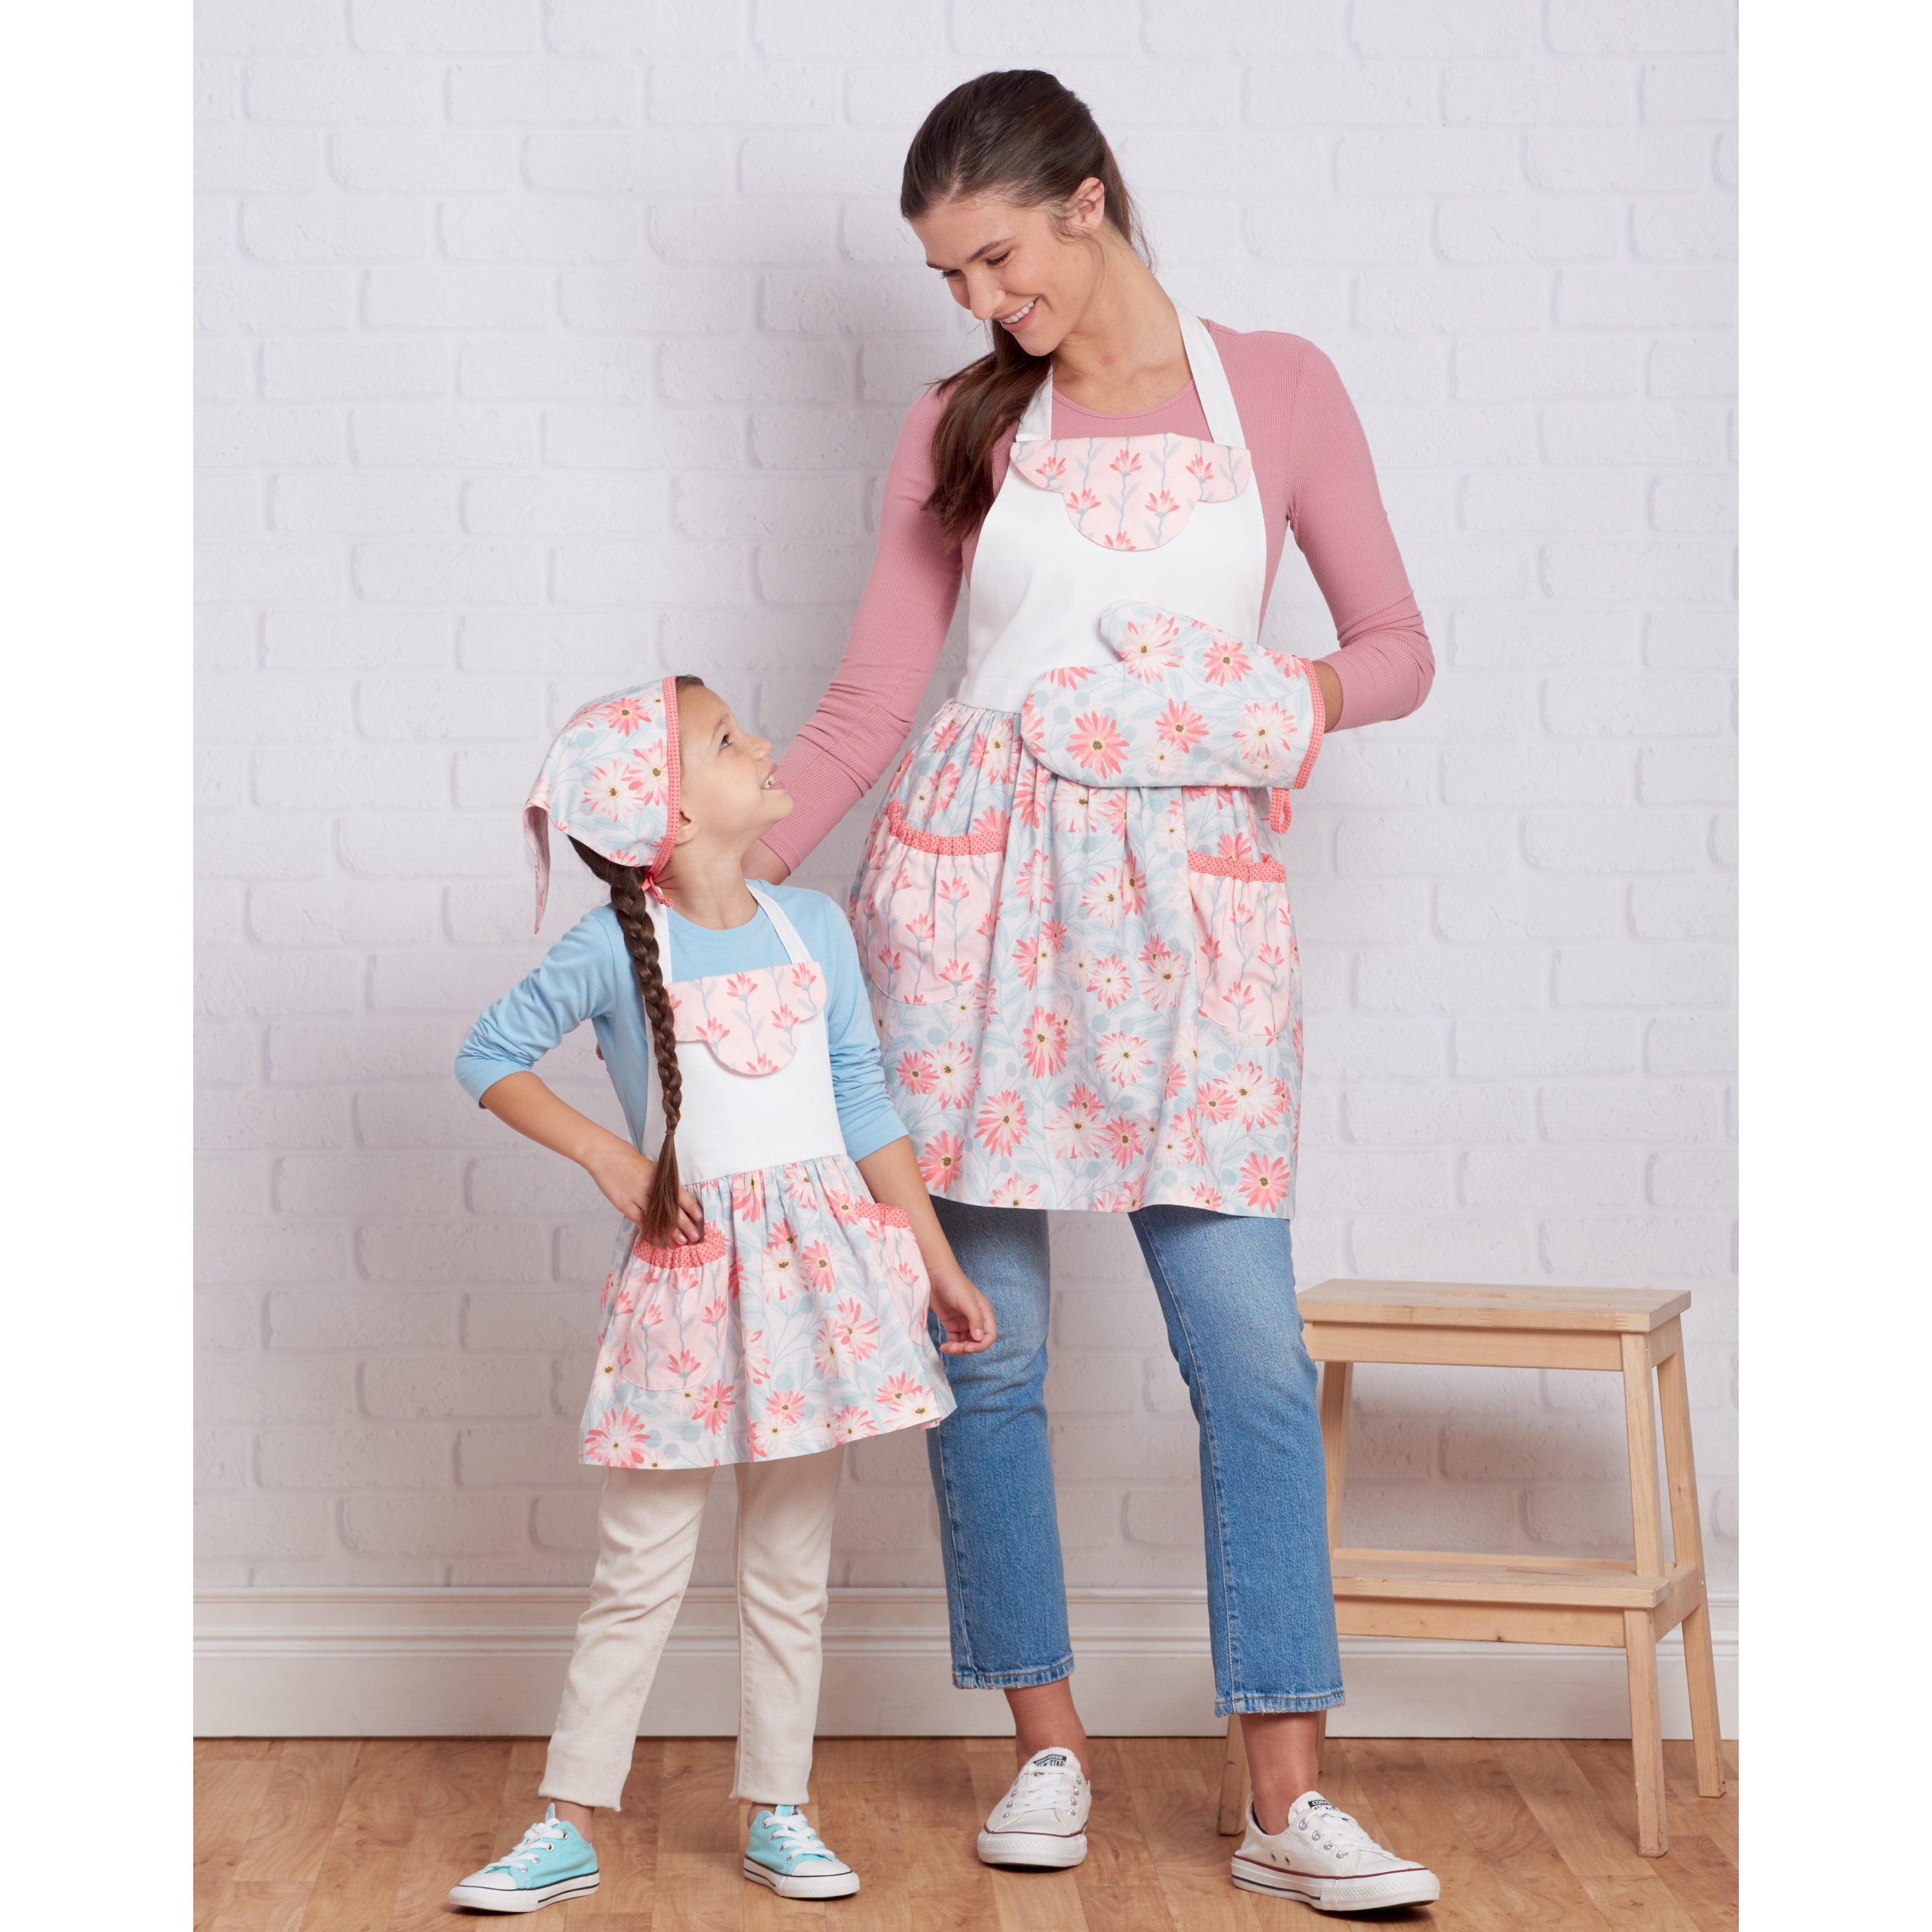 Simplicity 9565 Children's and Misses' Aprons and Accessories pattern from Jaycotts Sewing Supplies